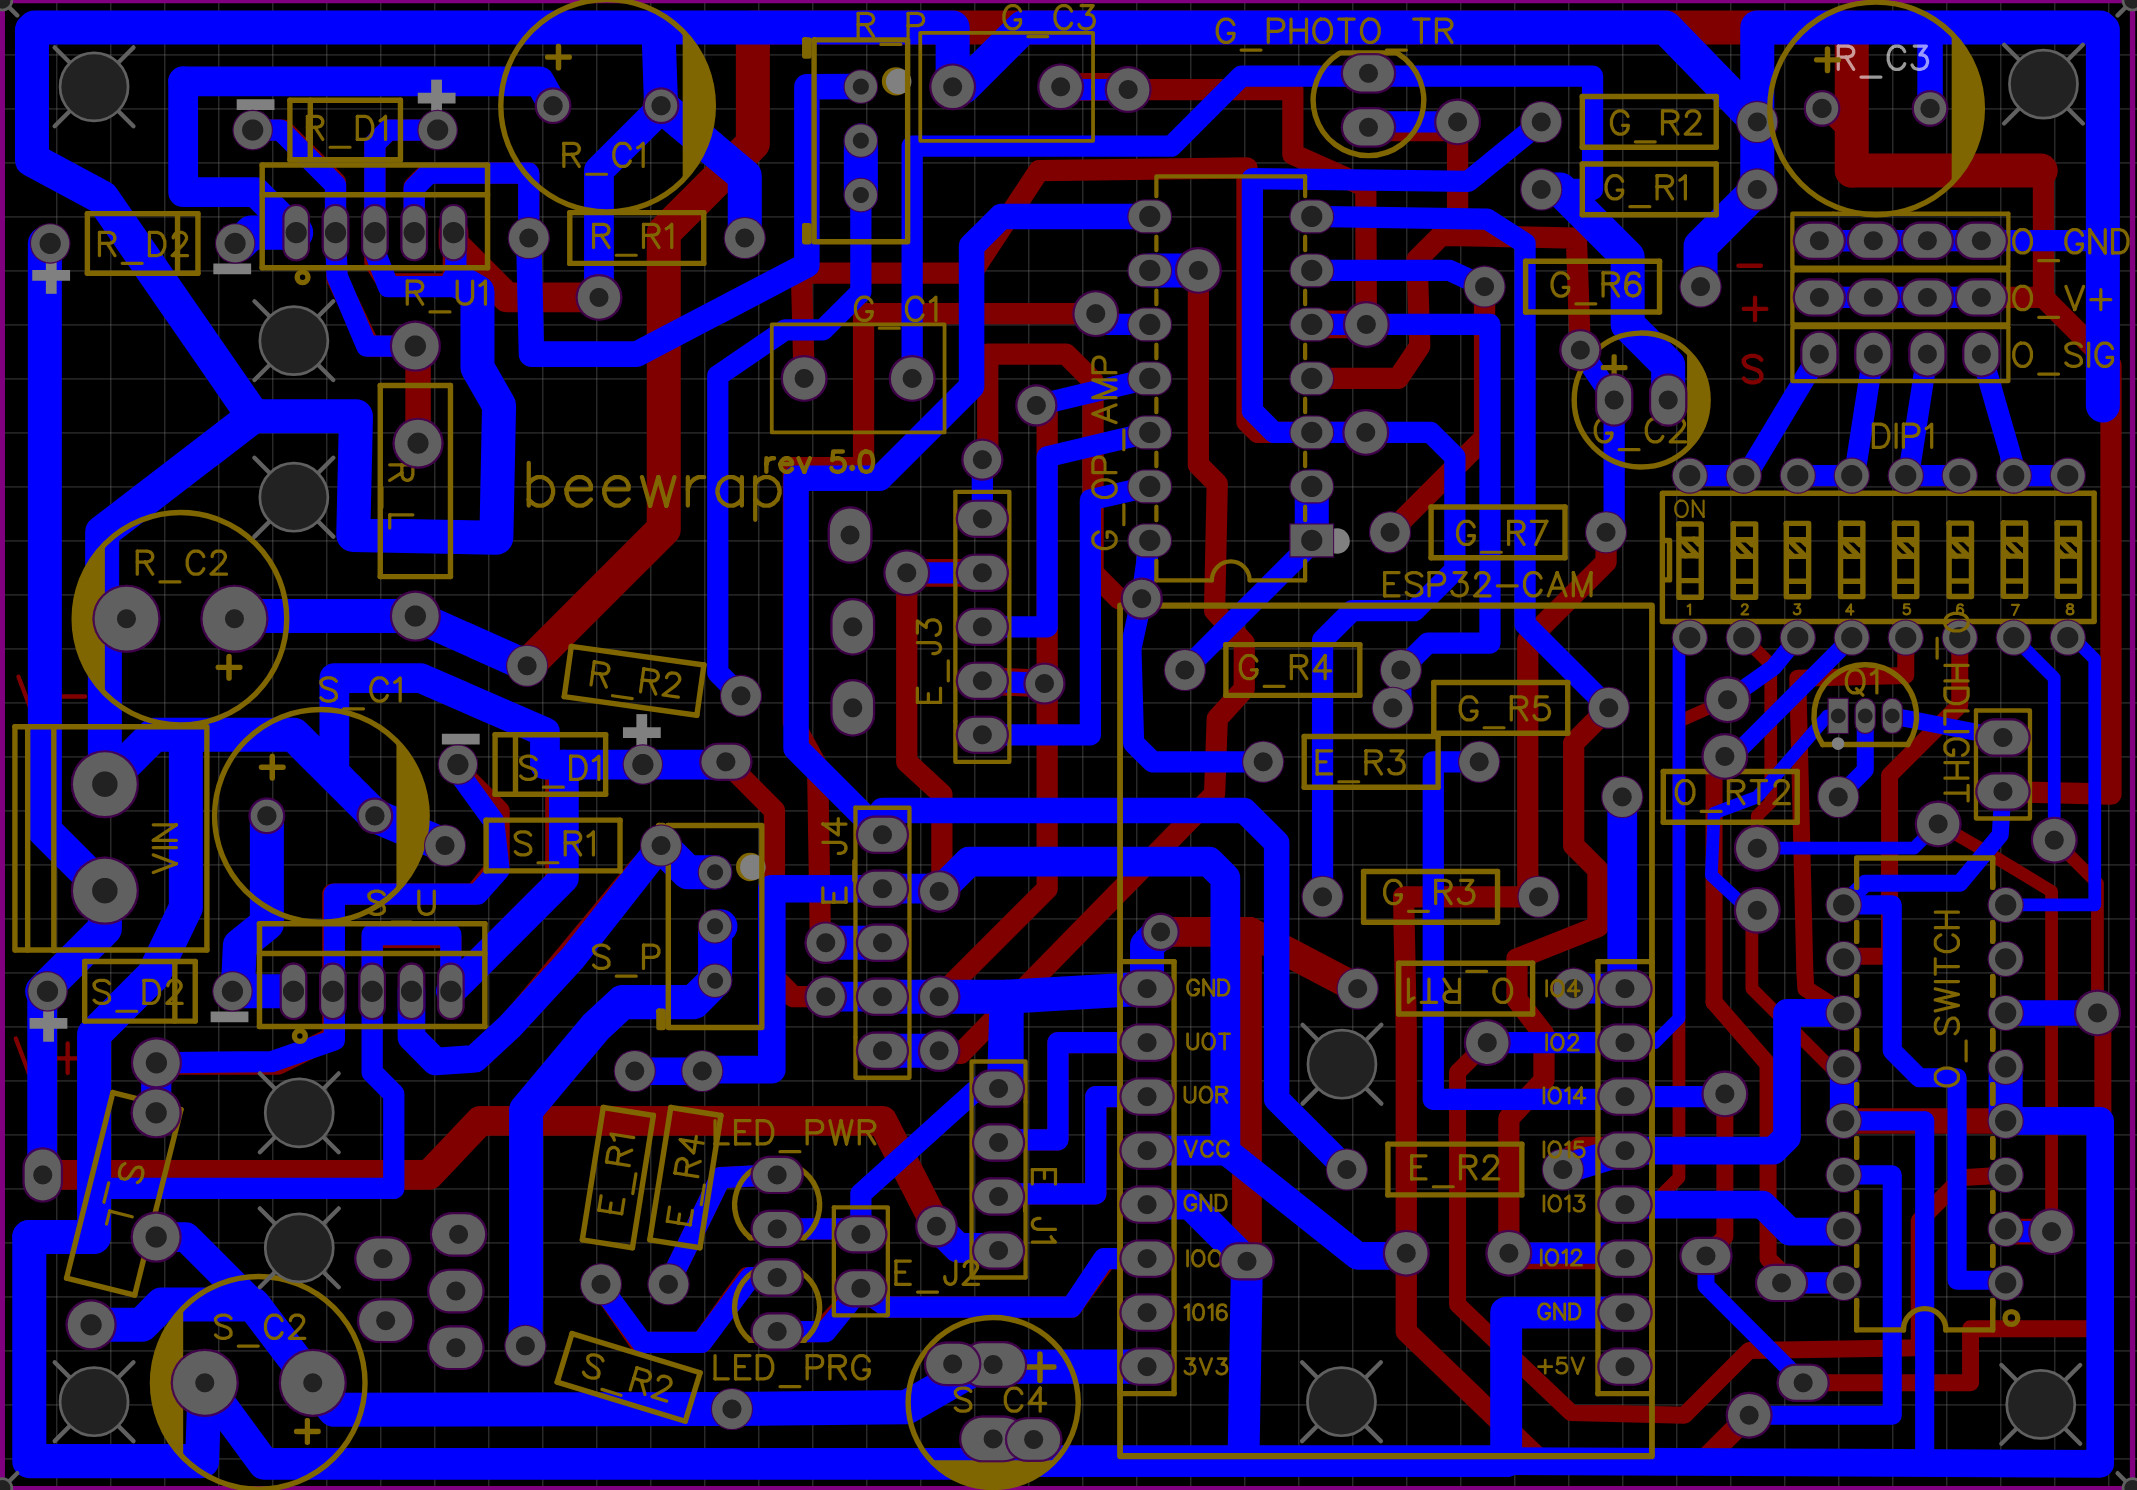 ../../../_images/200727-candy-esp32-board-on-EasyEDA-PCB.jpeg